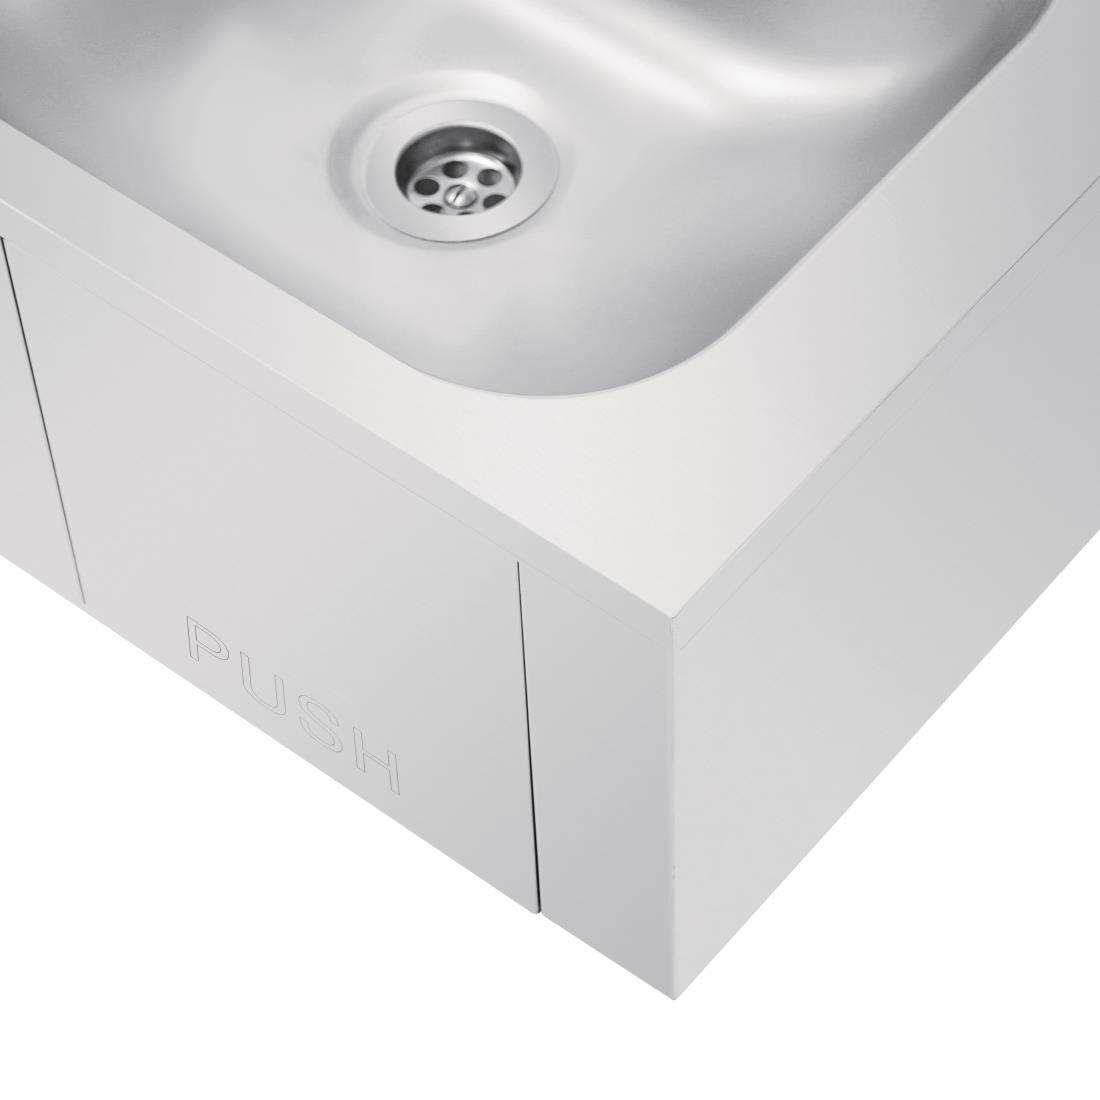 Vogue Stainless Steel Knee Operated Sink - GL280  - 6